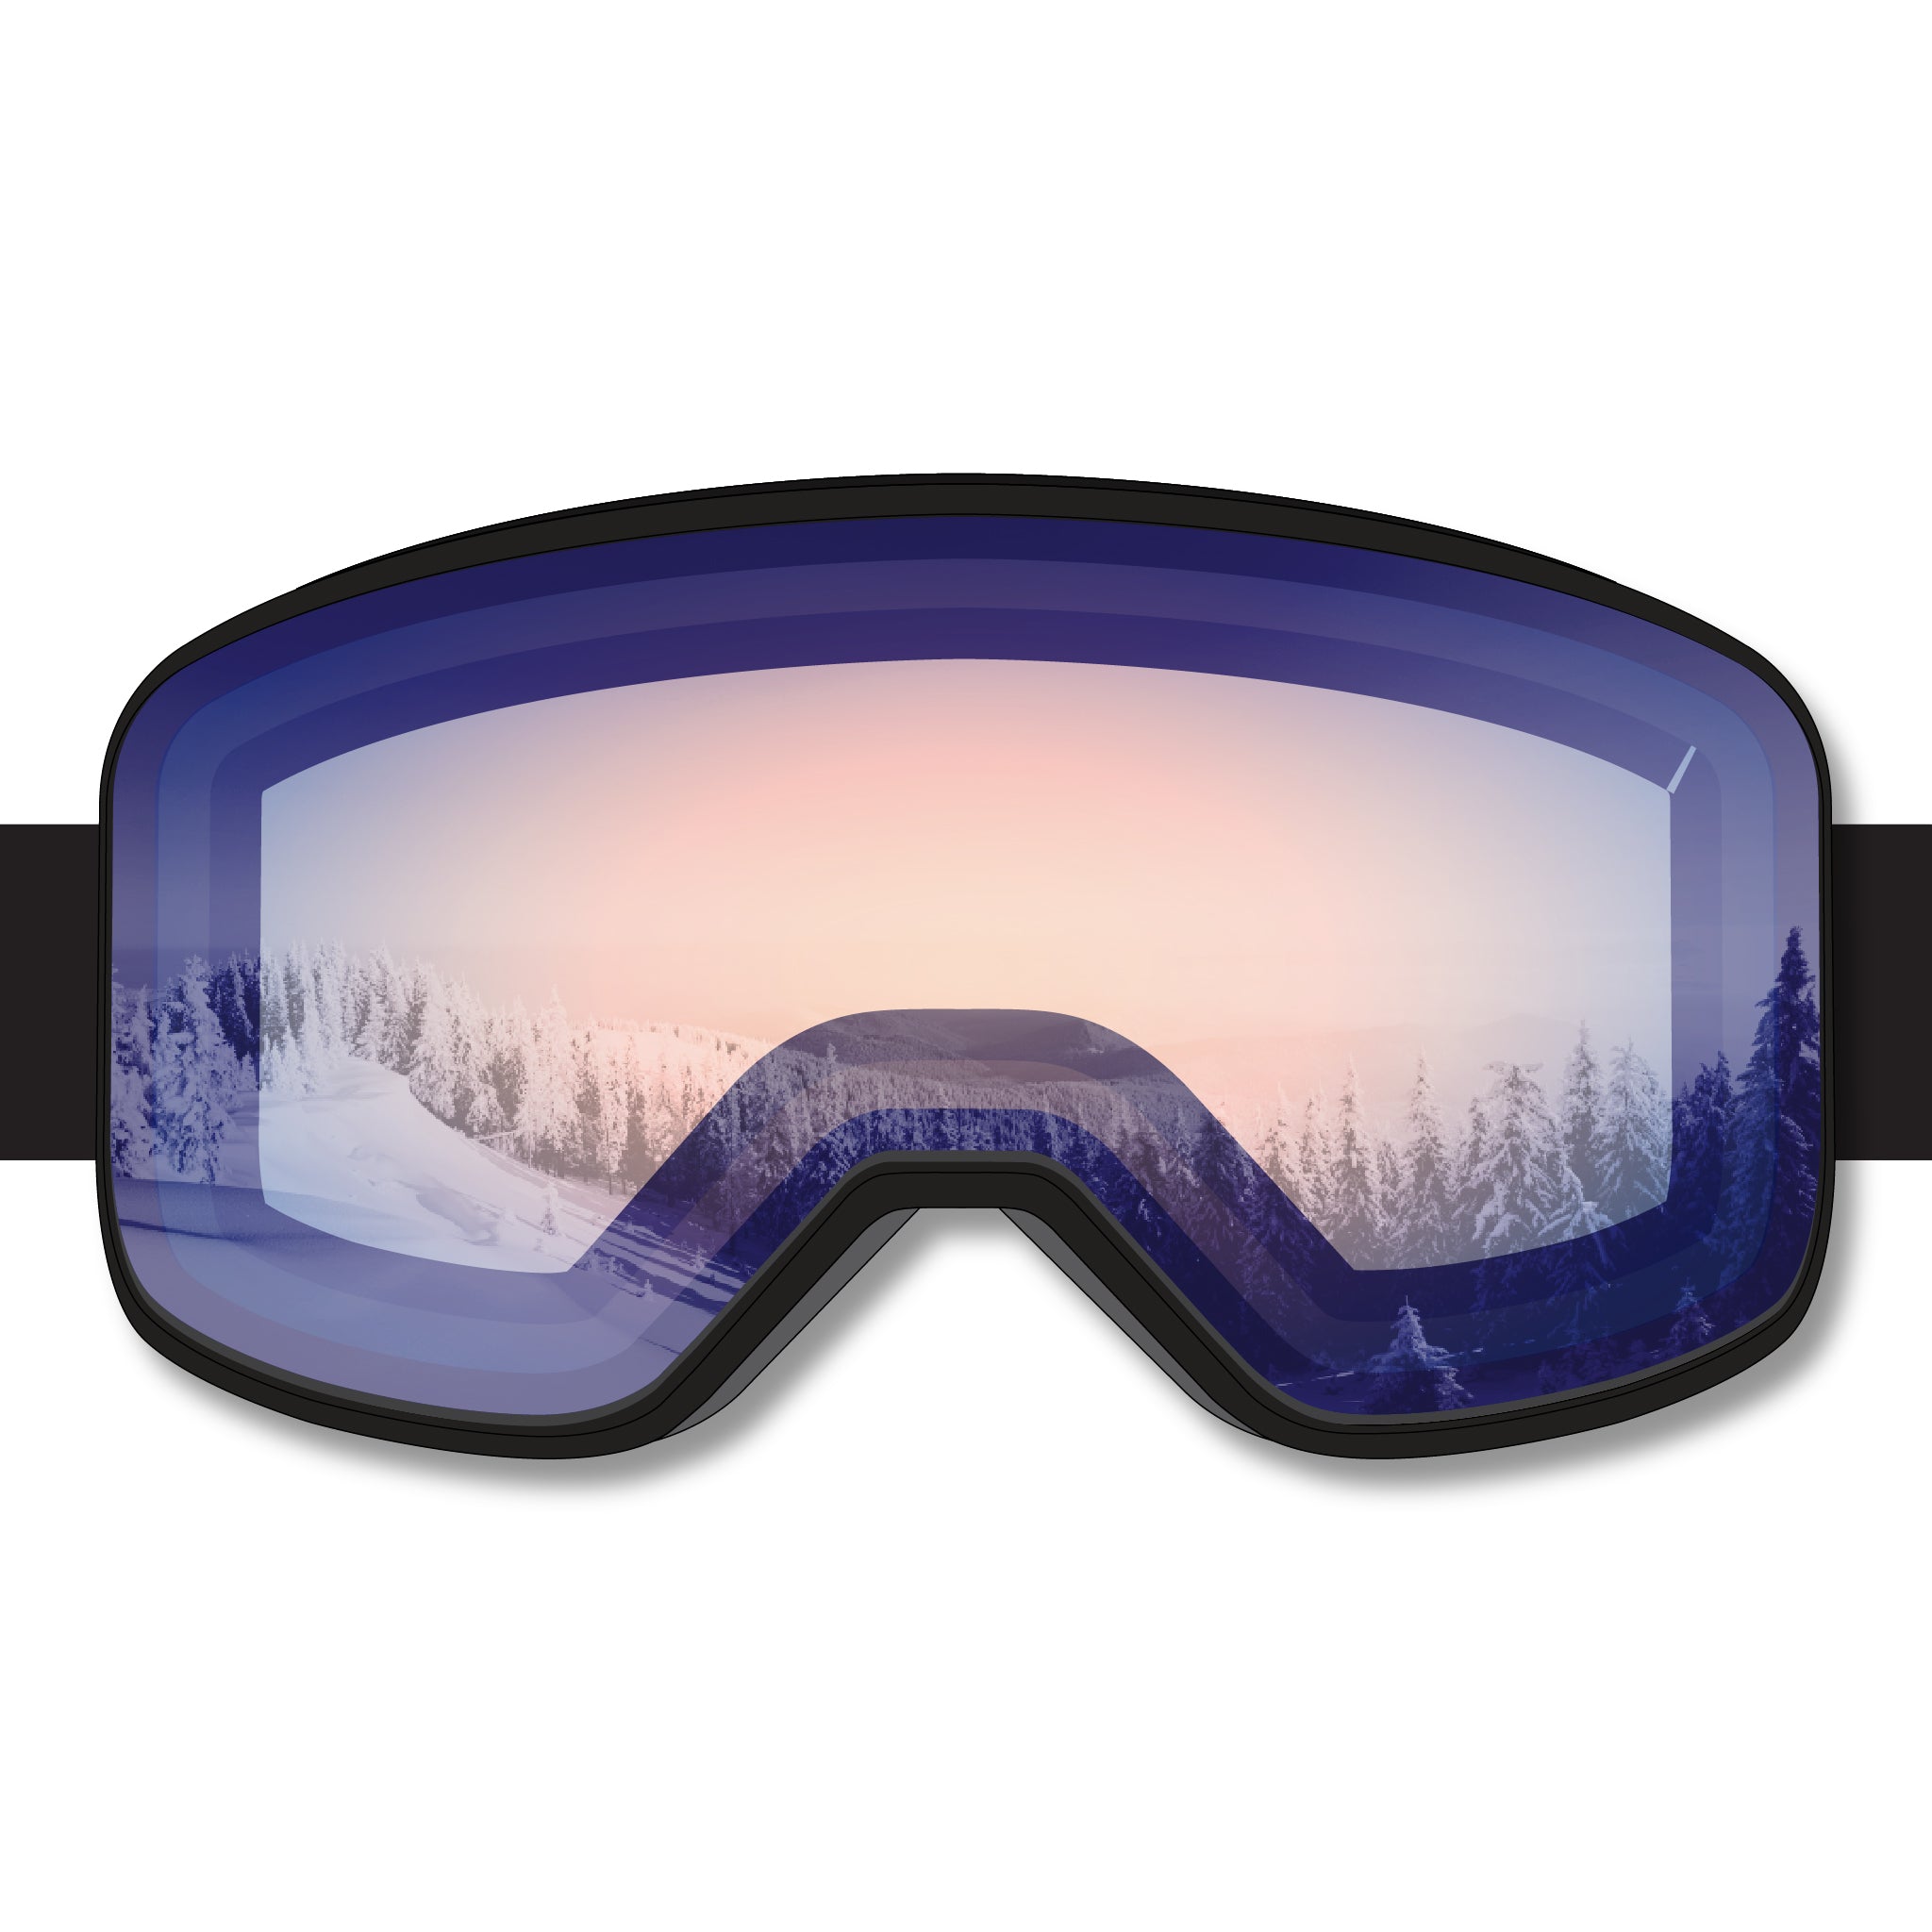 The STAGE Prop Black Ski Goggle with Detector Revo Lens